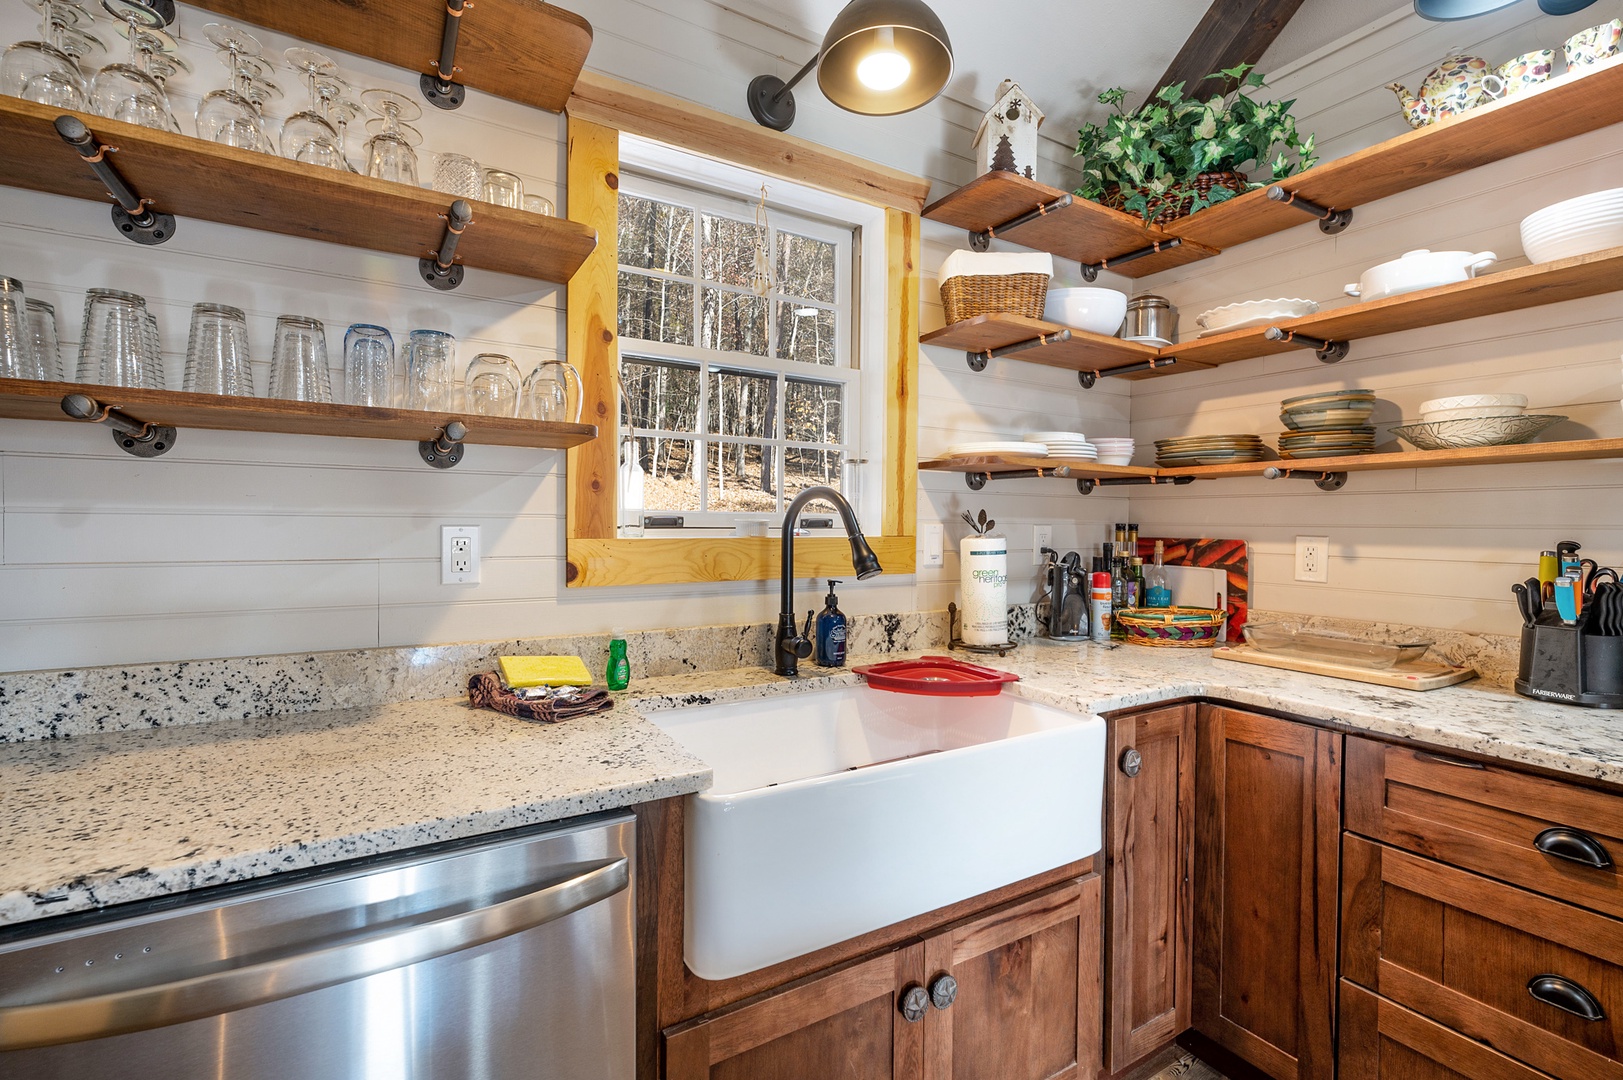 Just-in-Tyme - Kitchen with Farmhouse Sink